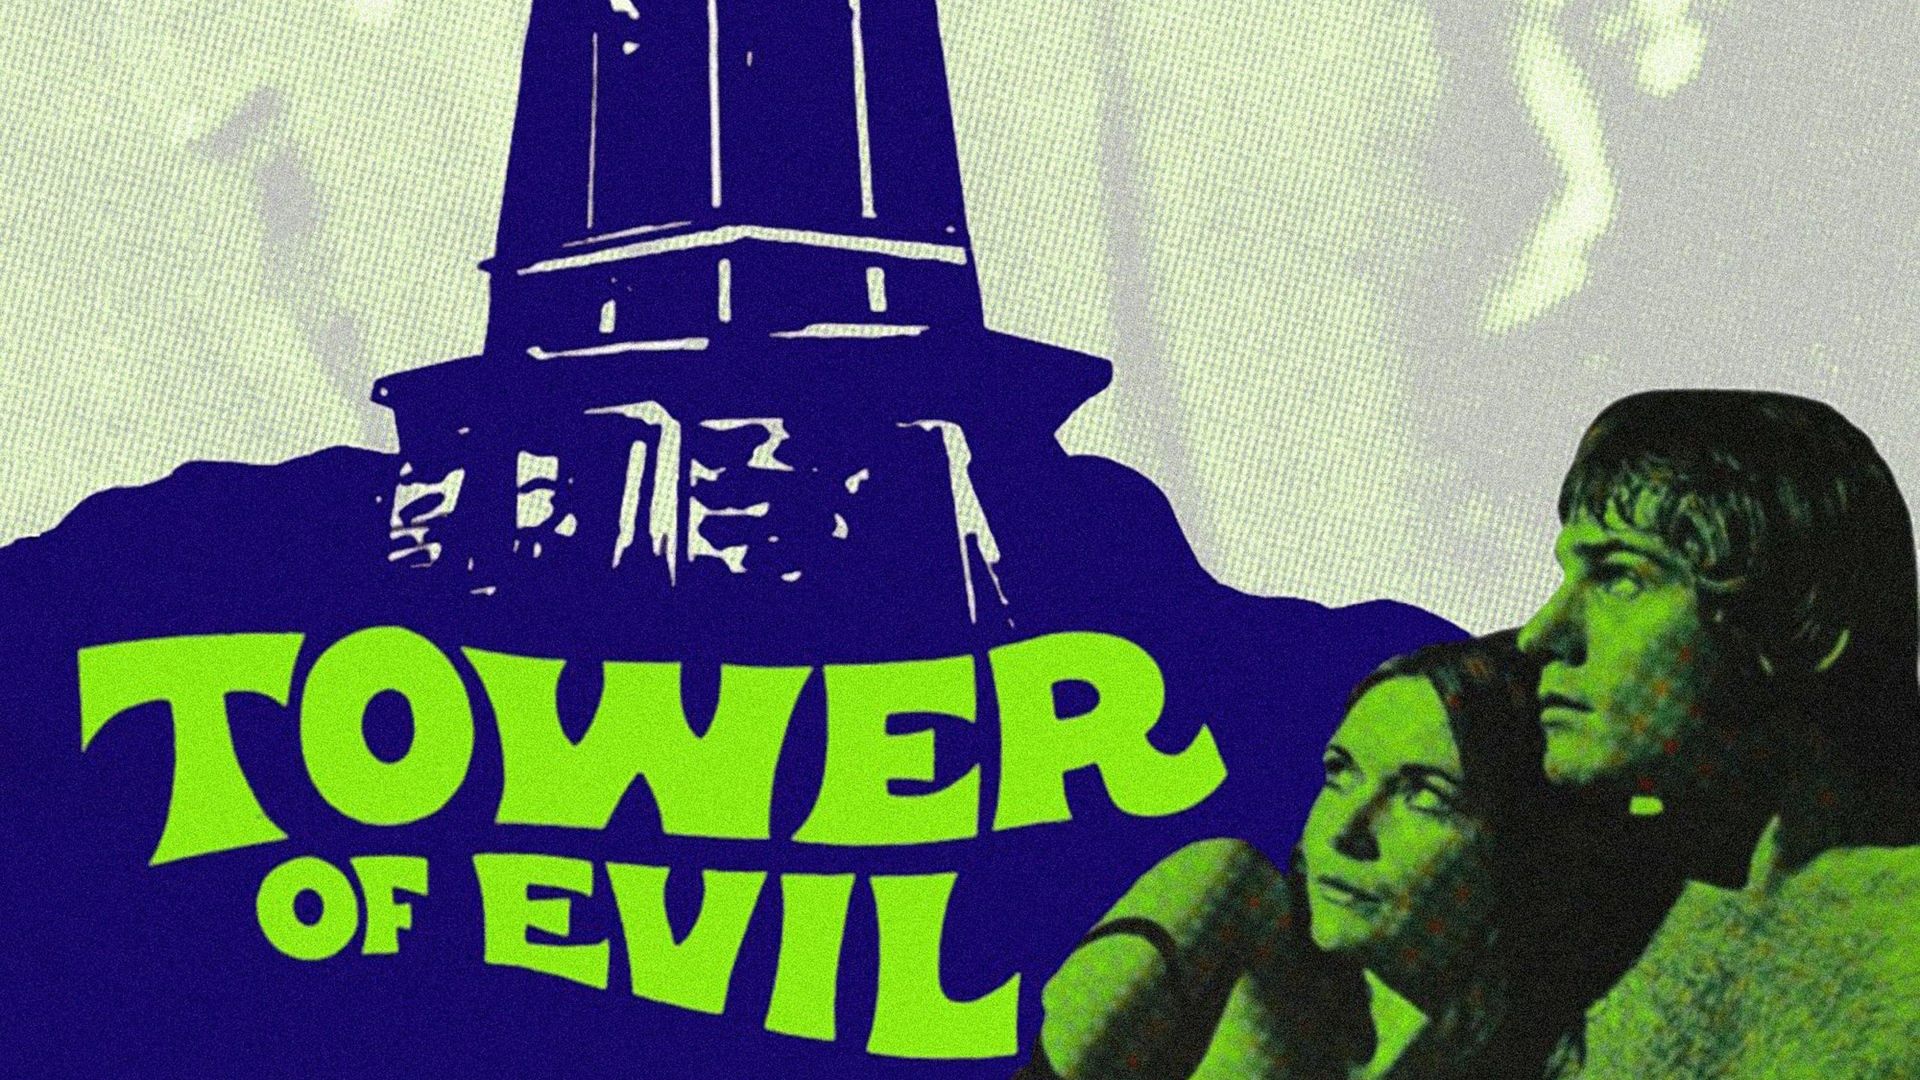 Tower of Evil Backdrop